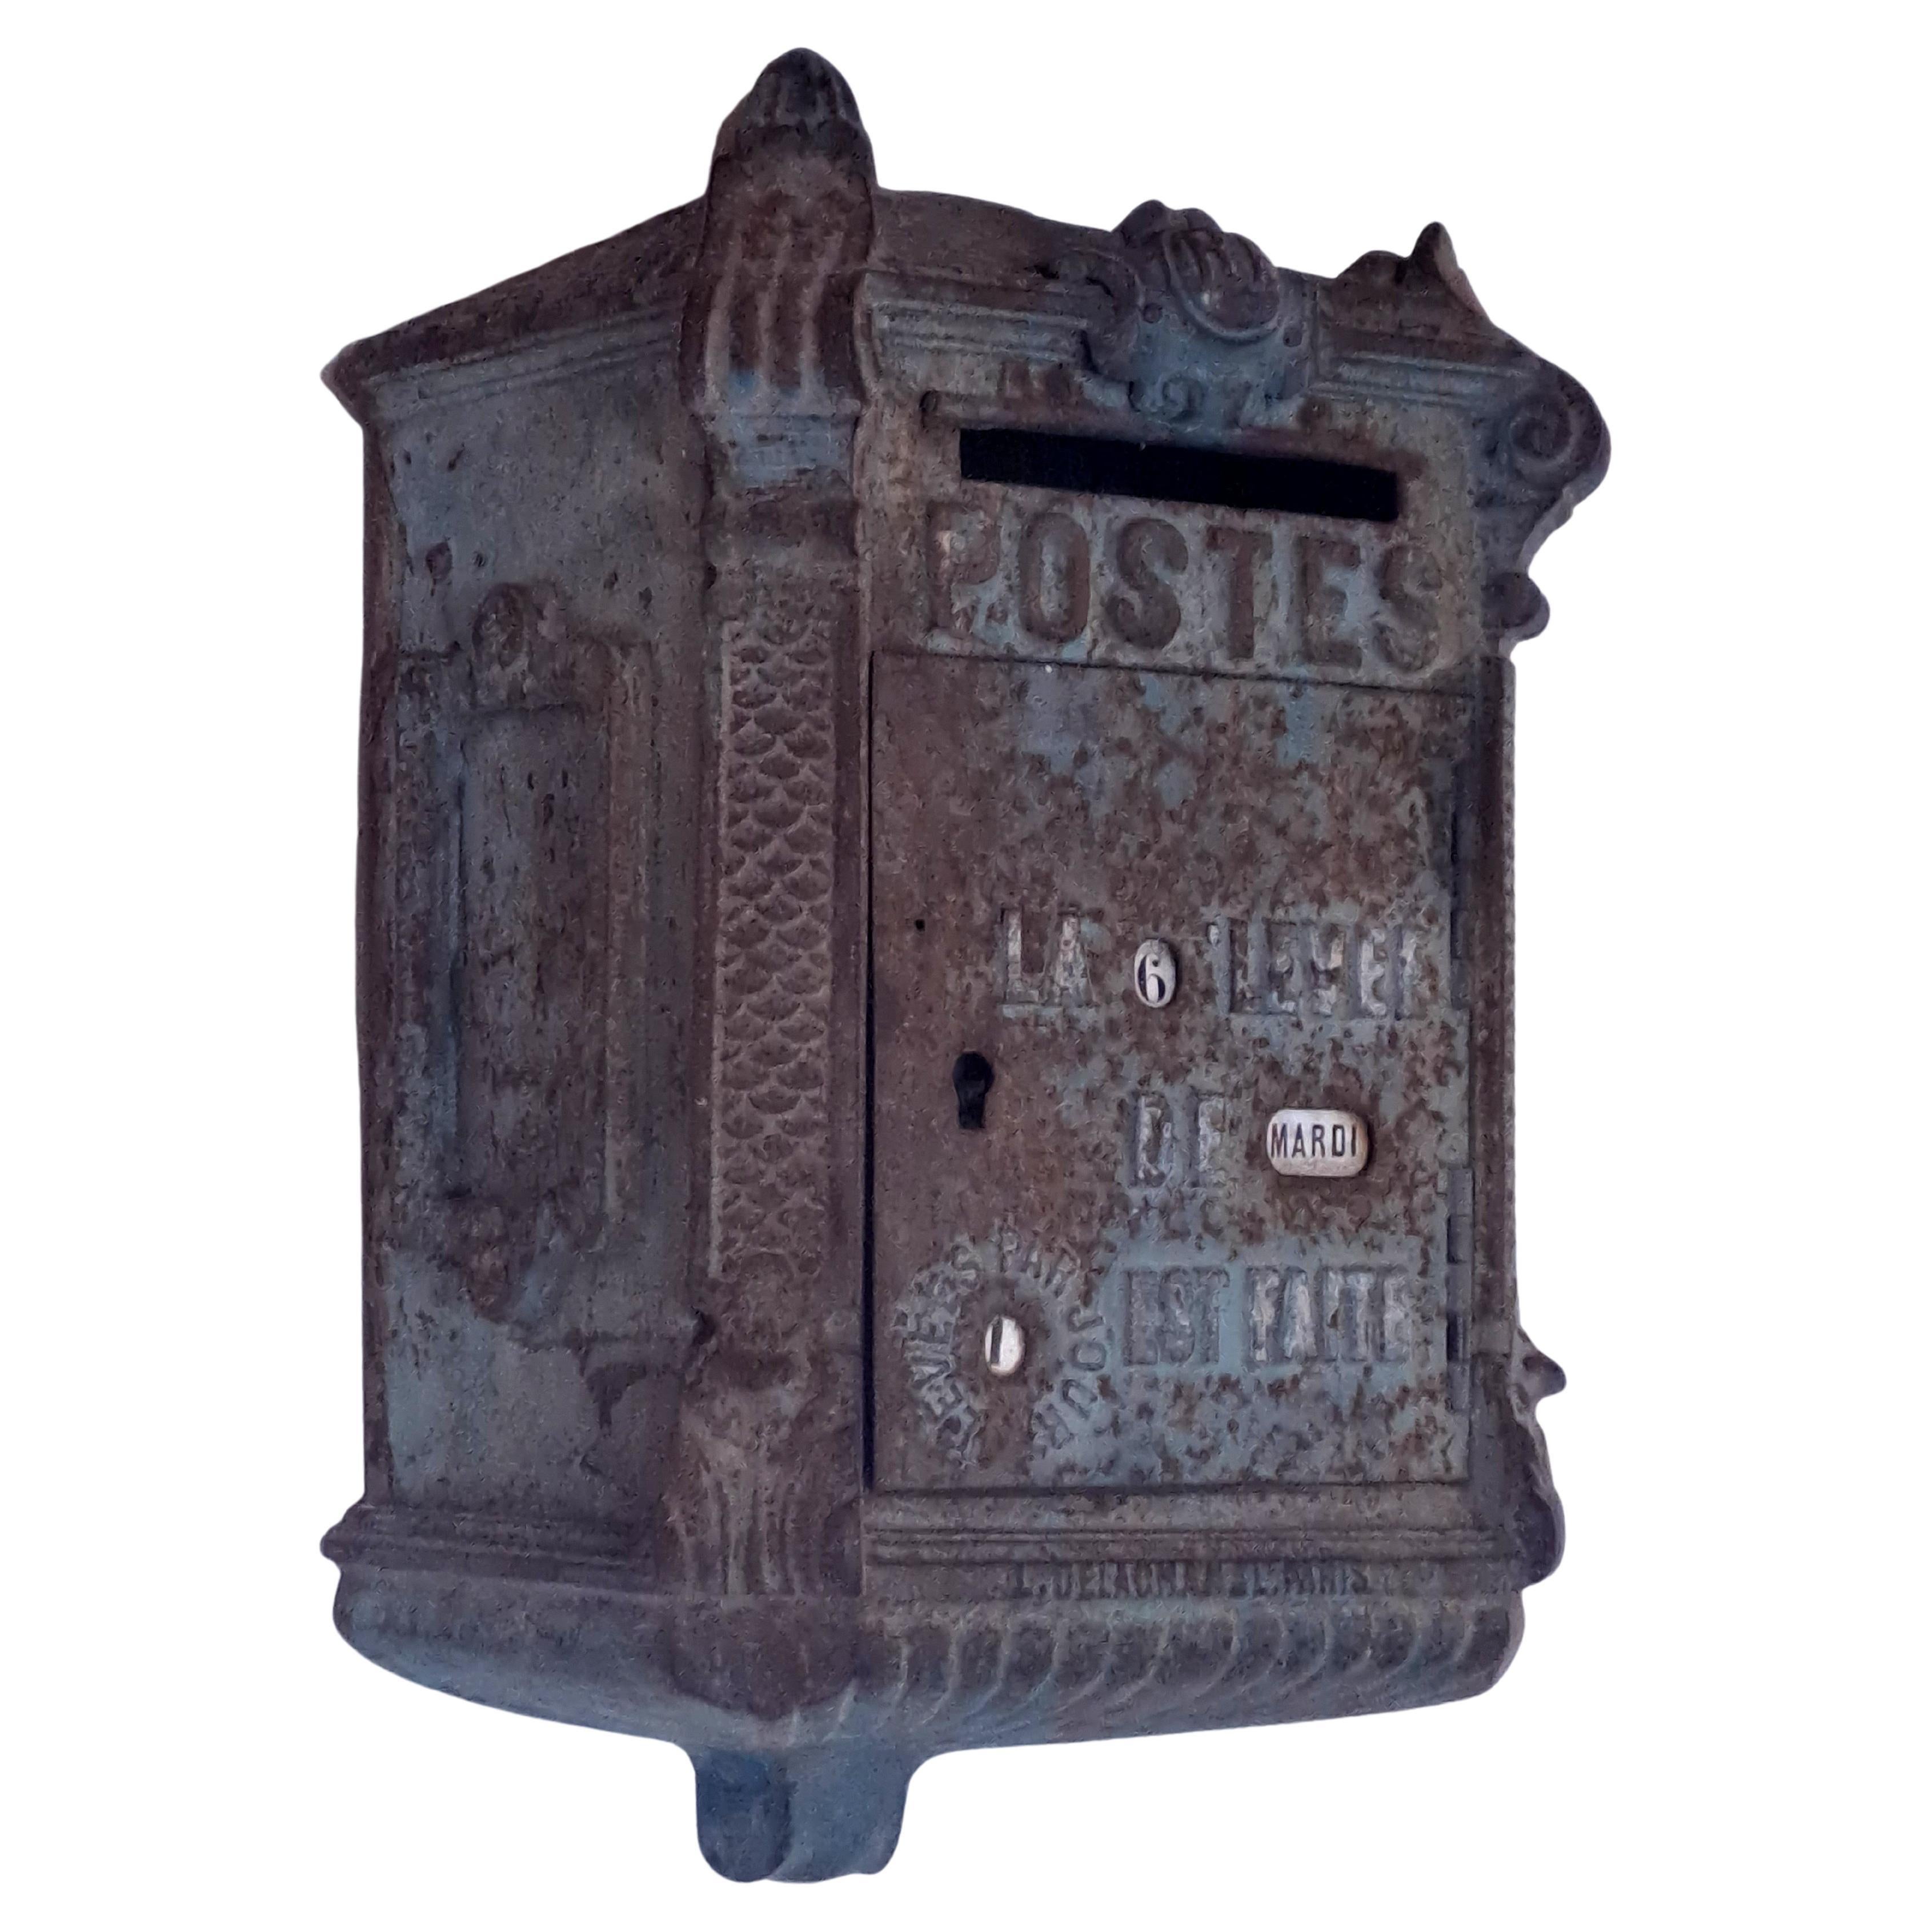 French Post Office Mailbox - Cast Iron - Delachanal Model - Late 19th Century For Sale